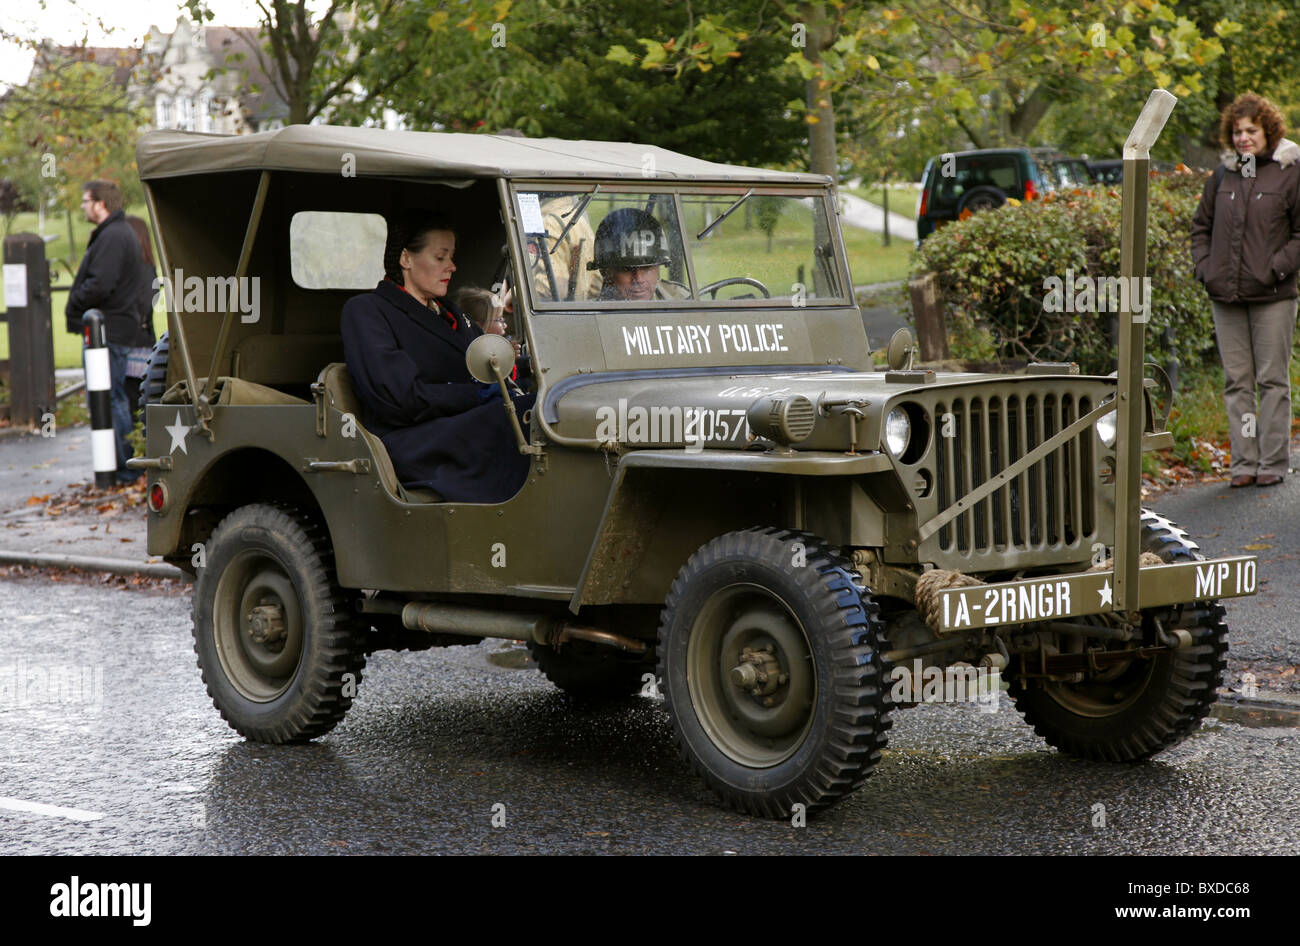 US GREEN MILITARY POLICE JEEP PICKERING YORKSHIRE PICKERING NORTH YORKSHIRE PICKERING NORTH YORKSHIRE 16 October 2010 Stock Photo